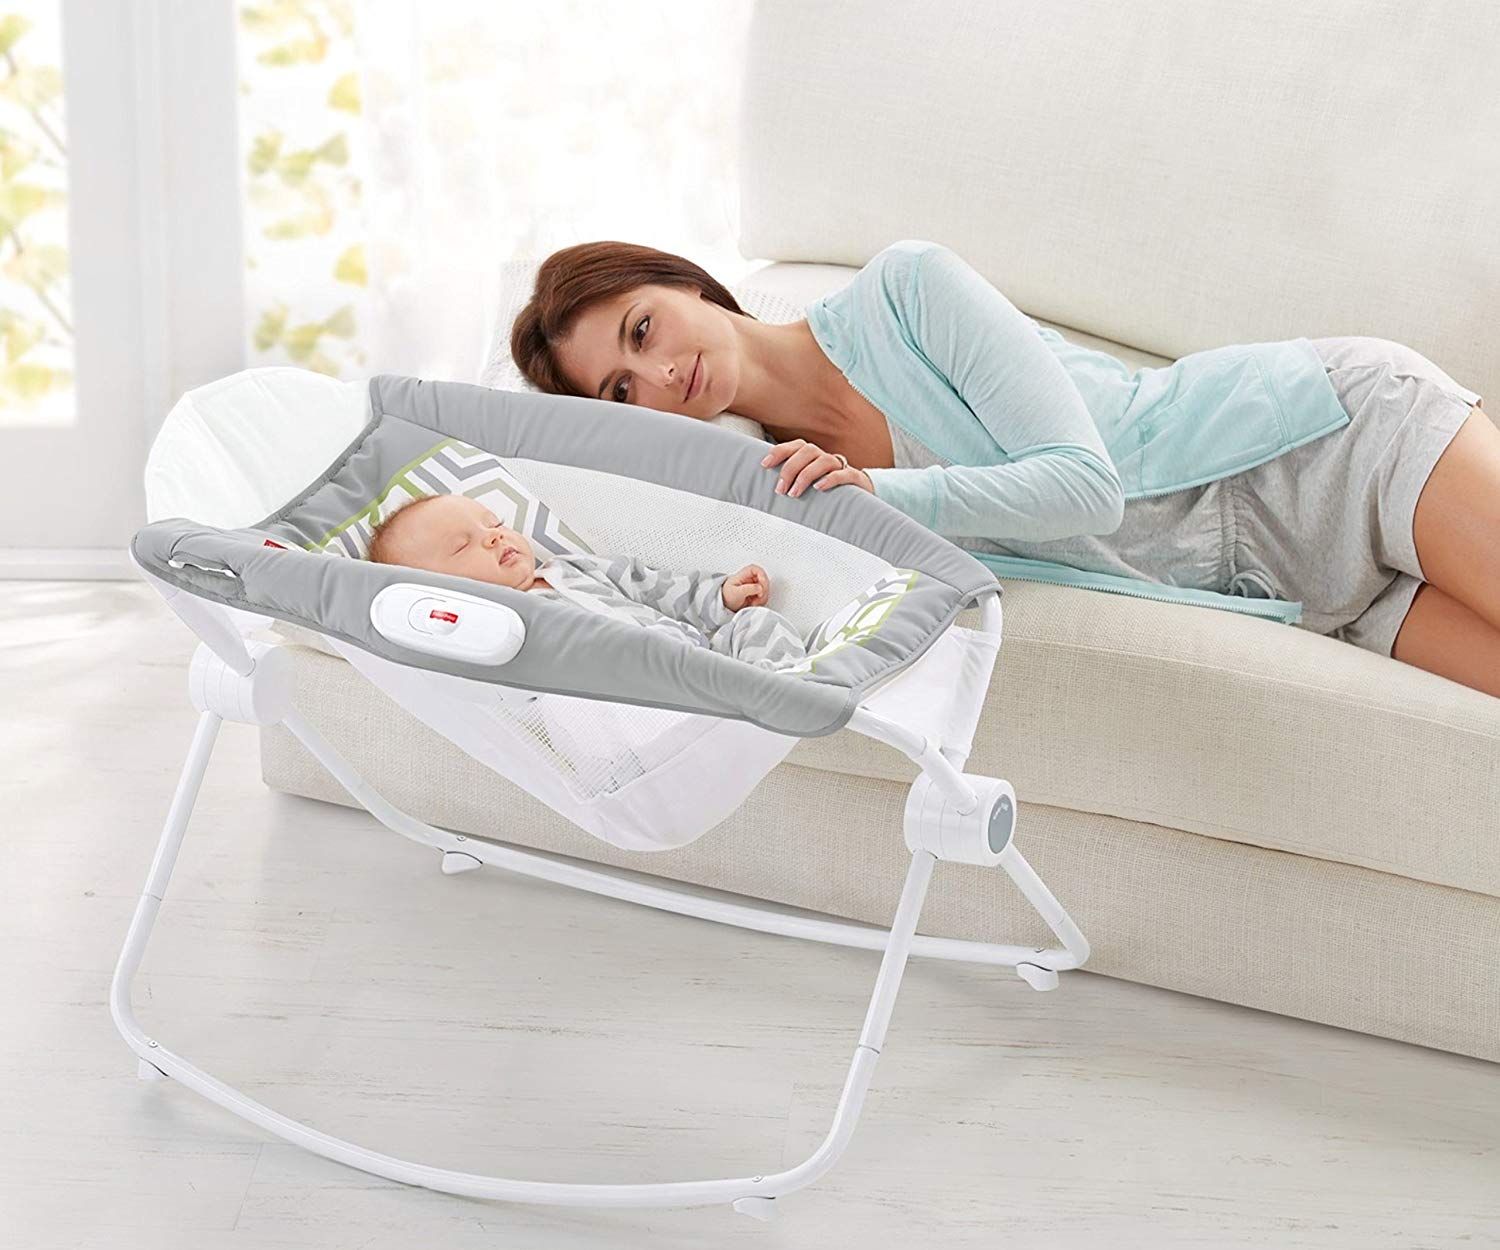 Fisher-Price rock 'n play sleeper is handy for napping at home or away